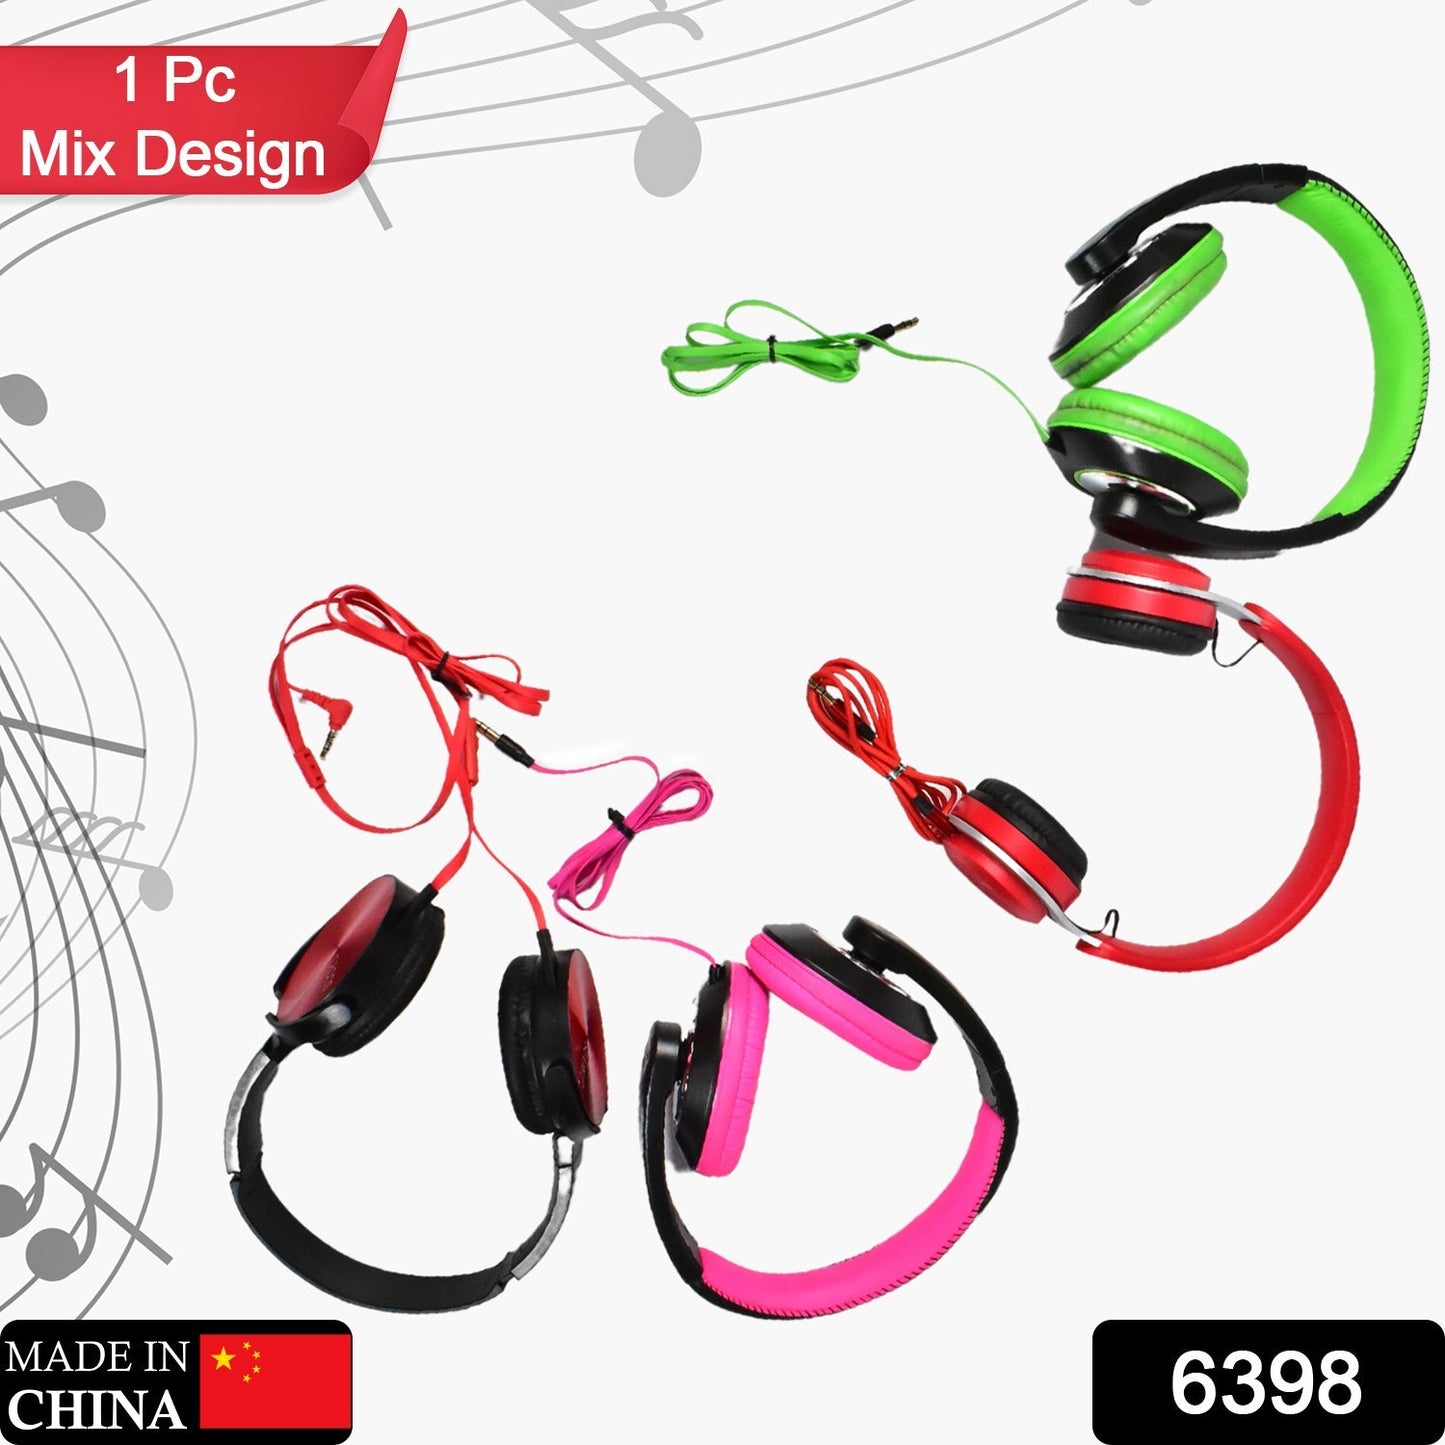 6398 WIRED HEADPHONES WITH MIC ON-EAR HEADPHONES WITH TANGLE FREE CABLE FOR ALL SMART PHONE SUPPORT HEAD PHONE (Mix Design 1 Pc) JK Trends